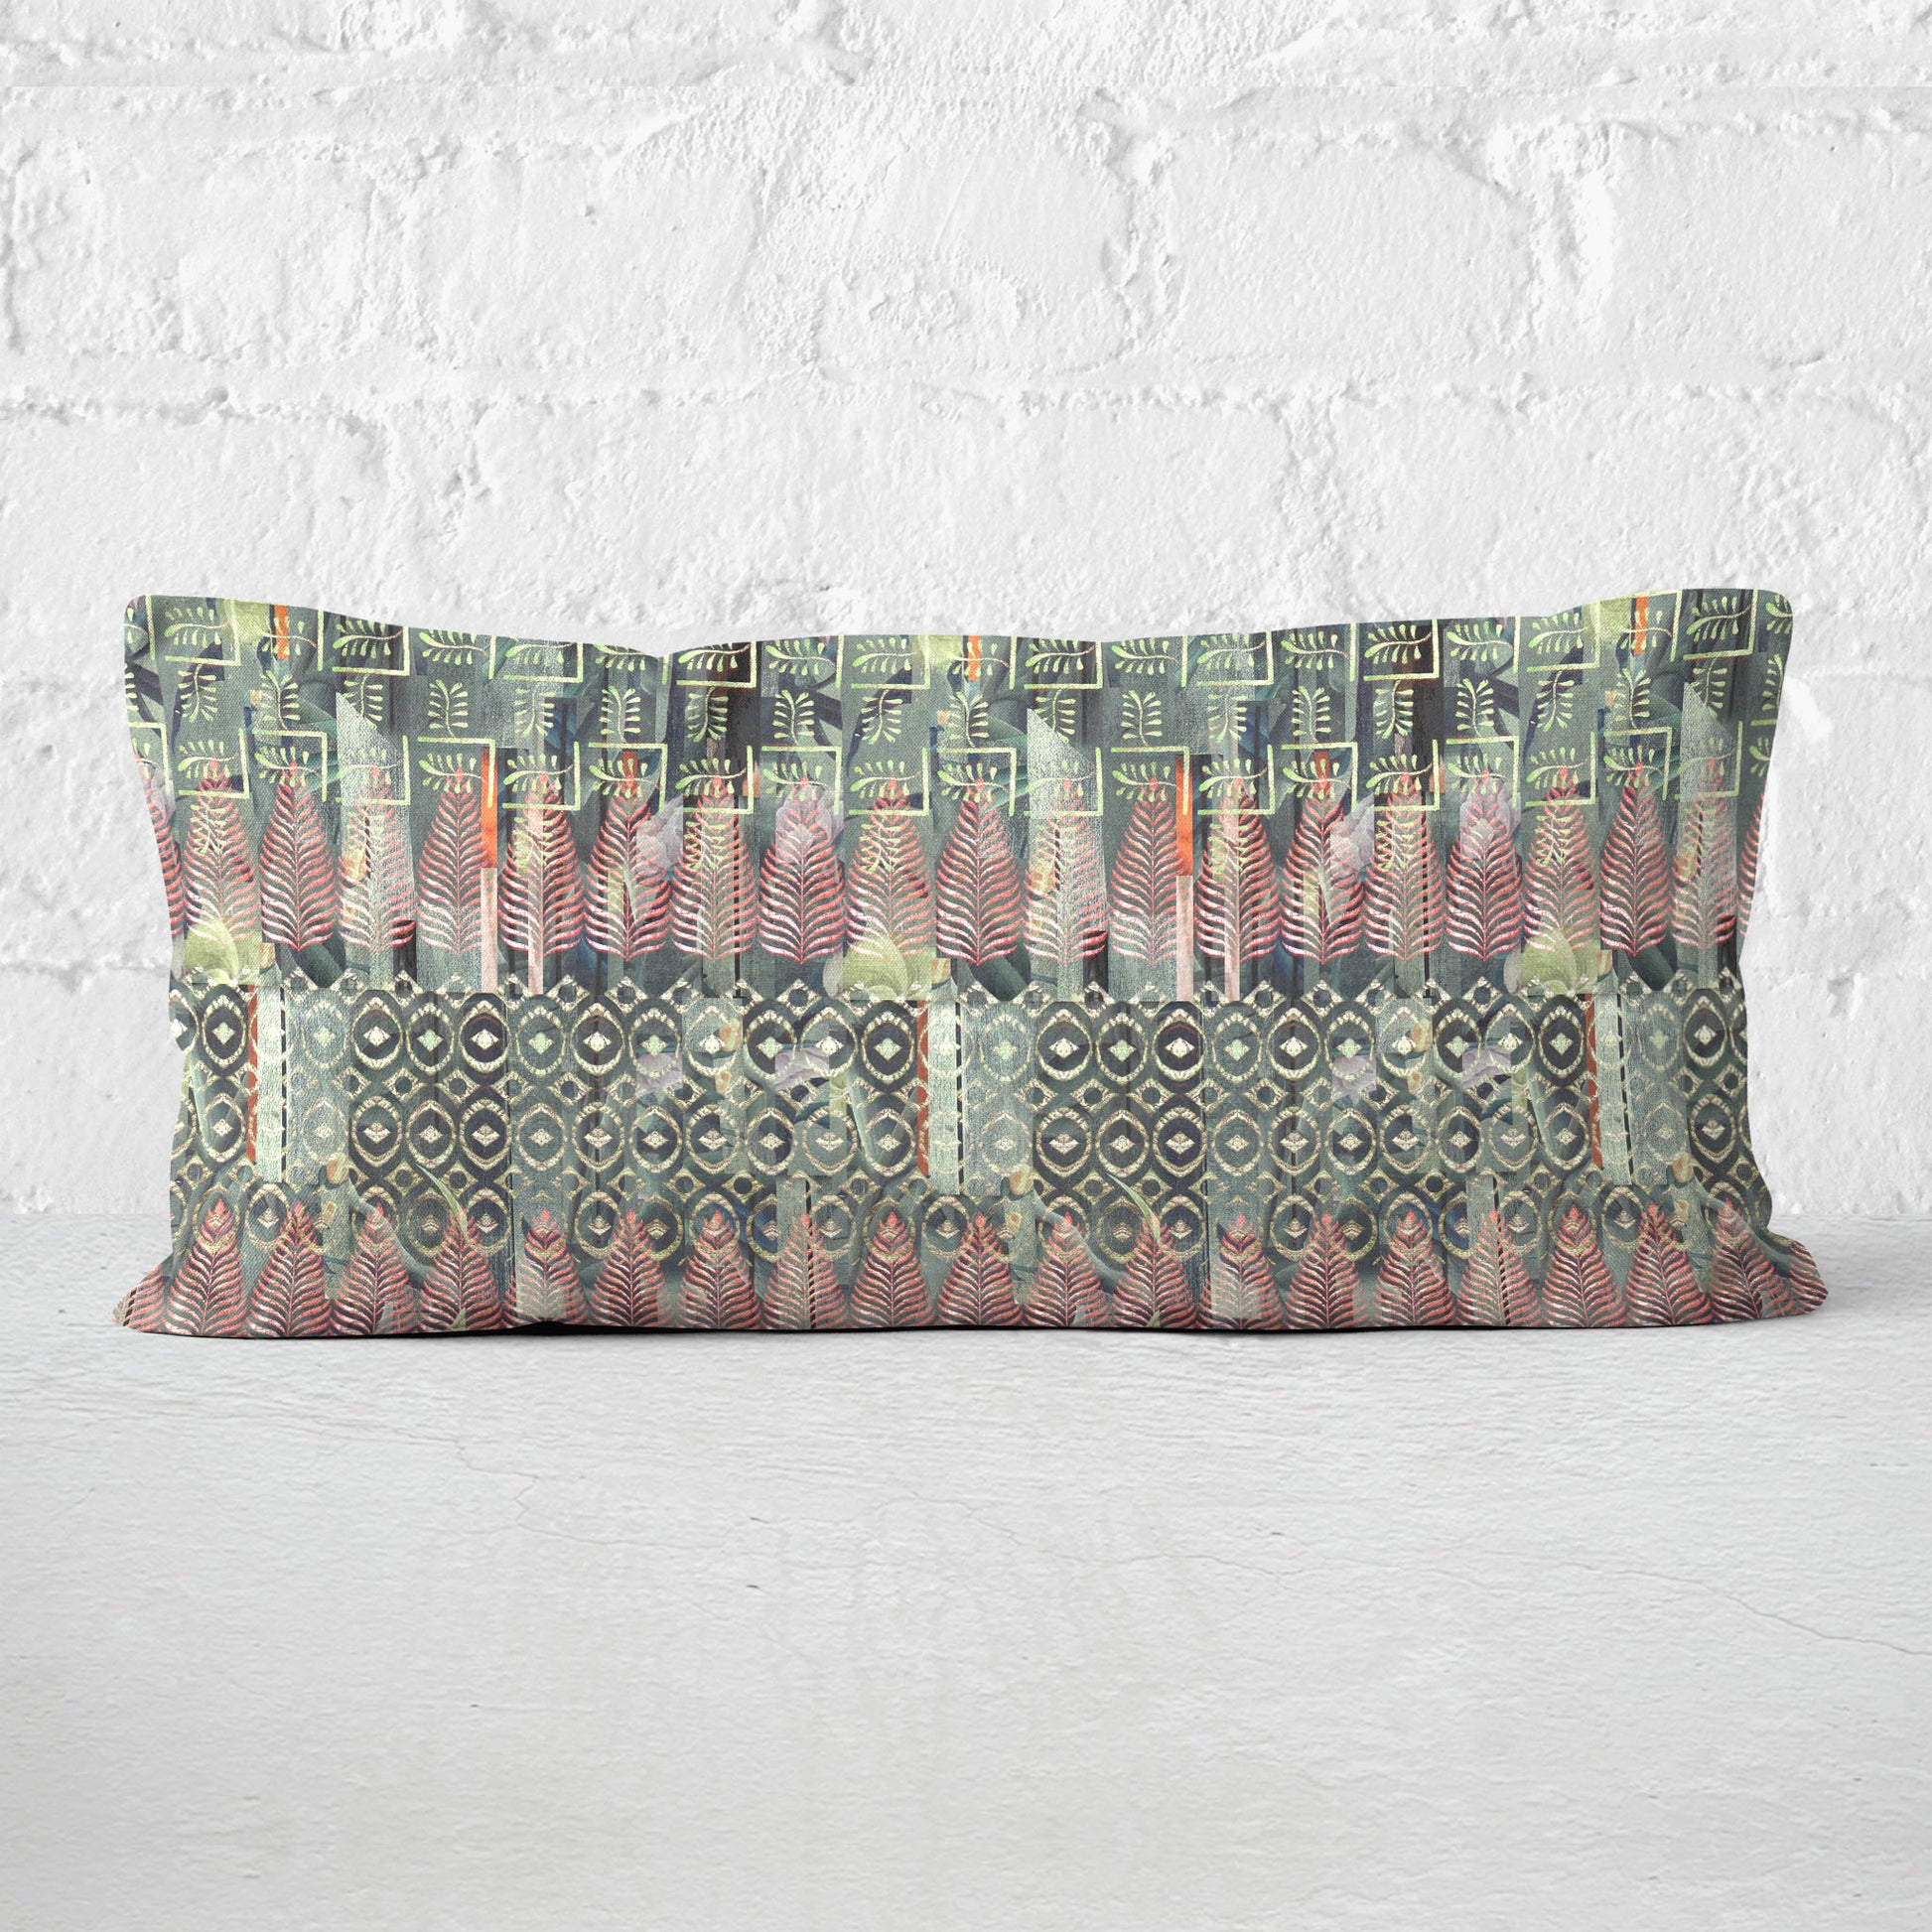 Rectangular lumbar pillow featuring a collaged and block print pattern in green set against a white brick wall.